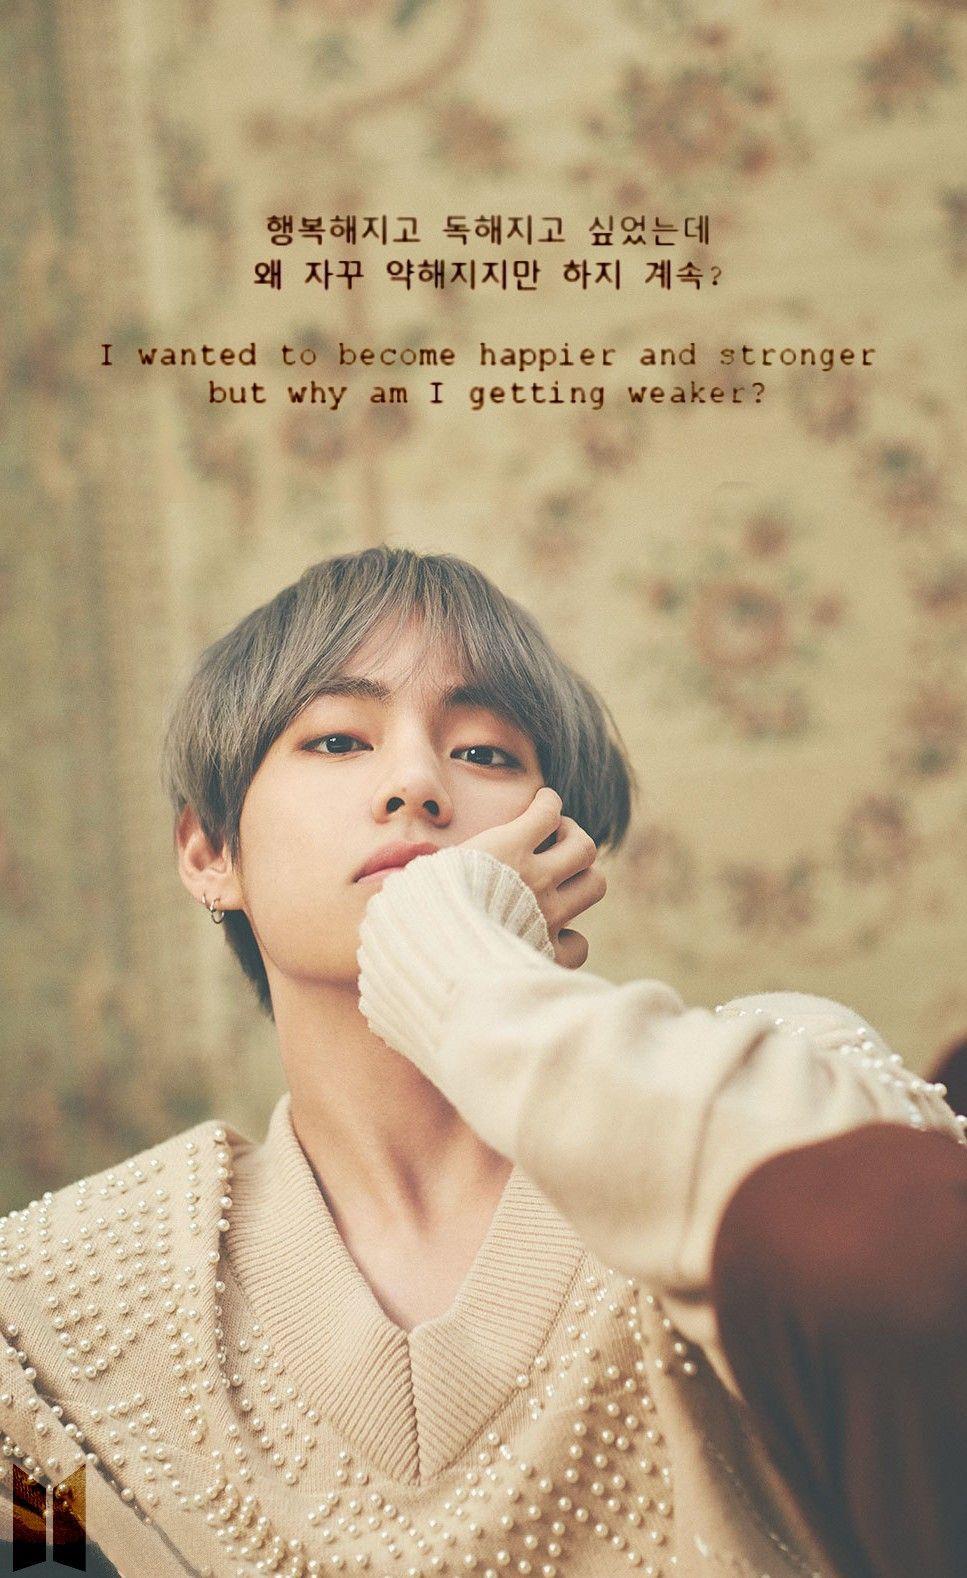 taehyung aesthetic wallpaper by aik_333 - Download on ZEDGE™ | be49